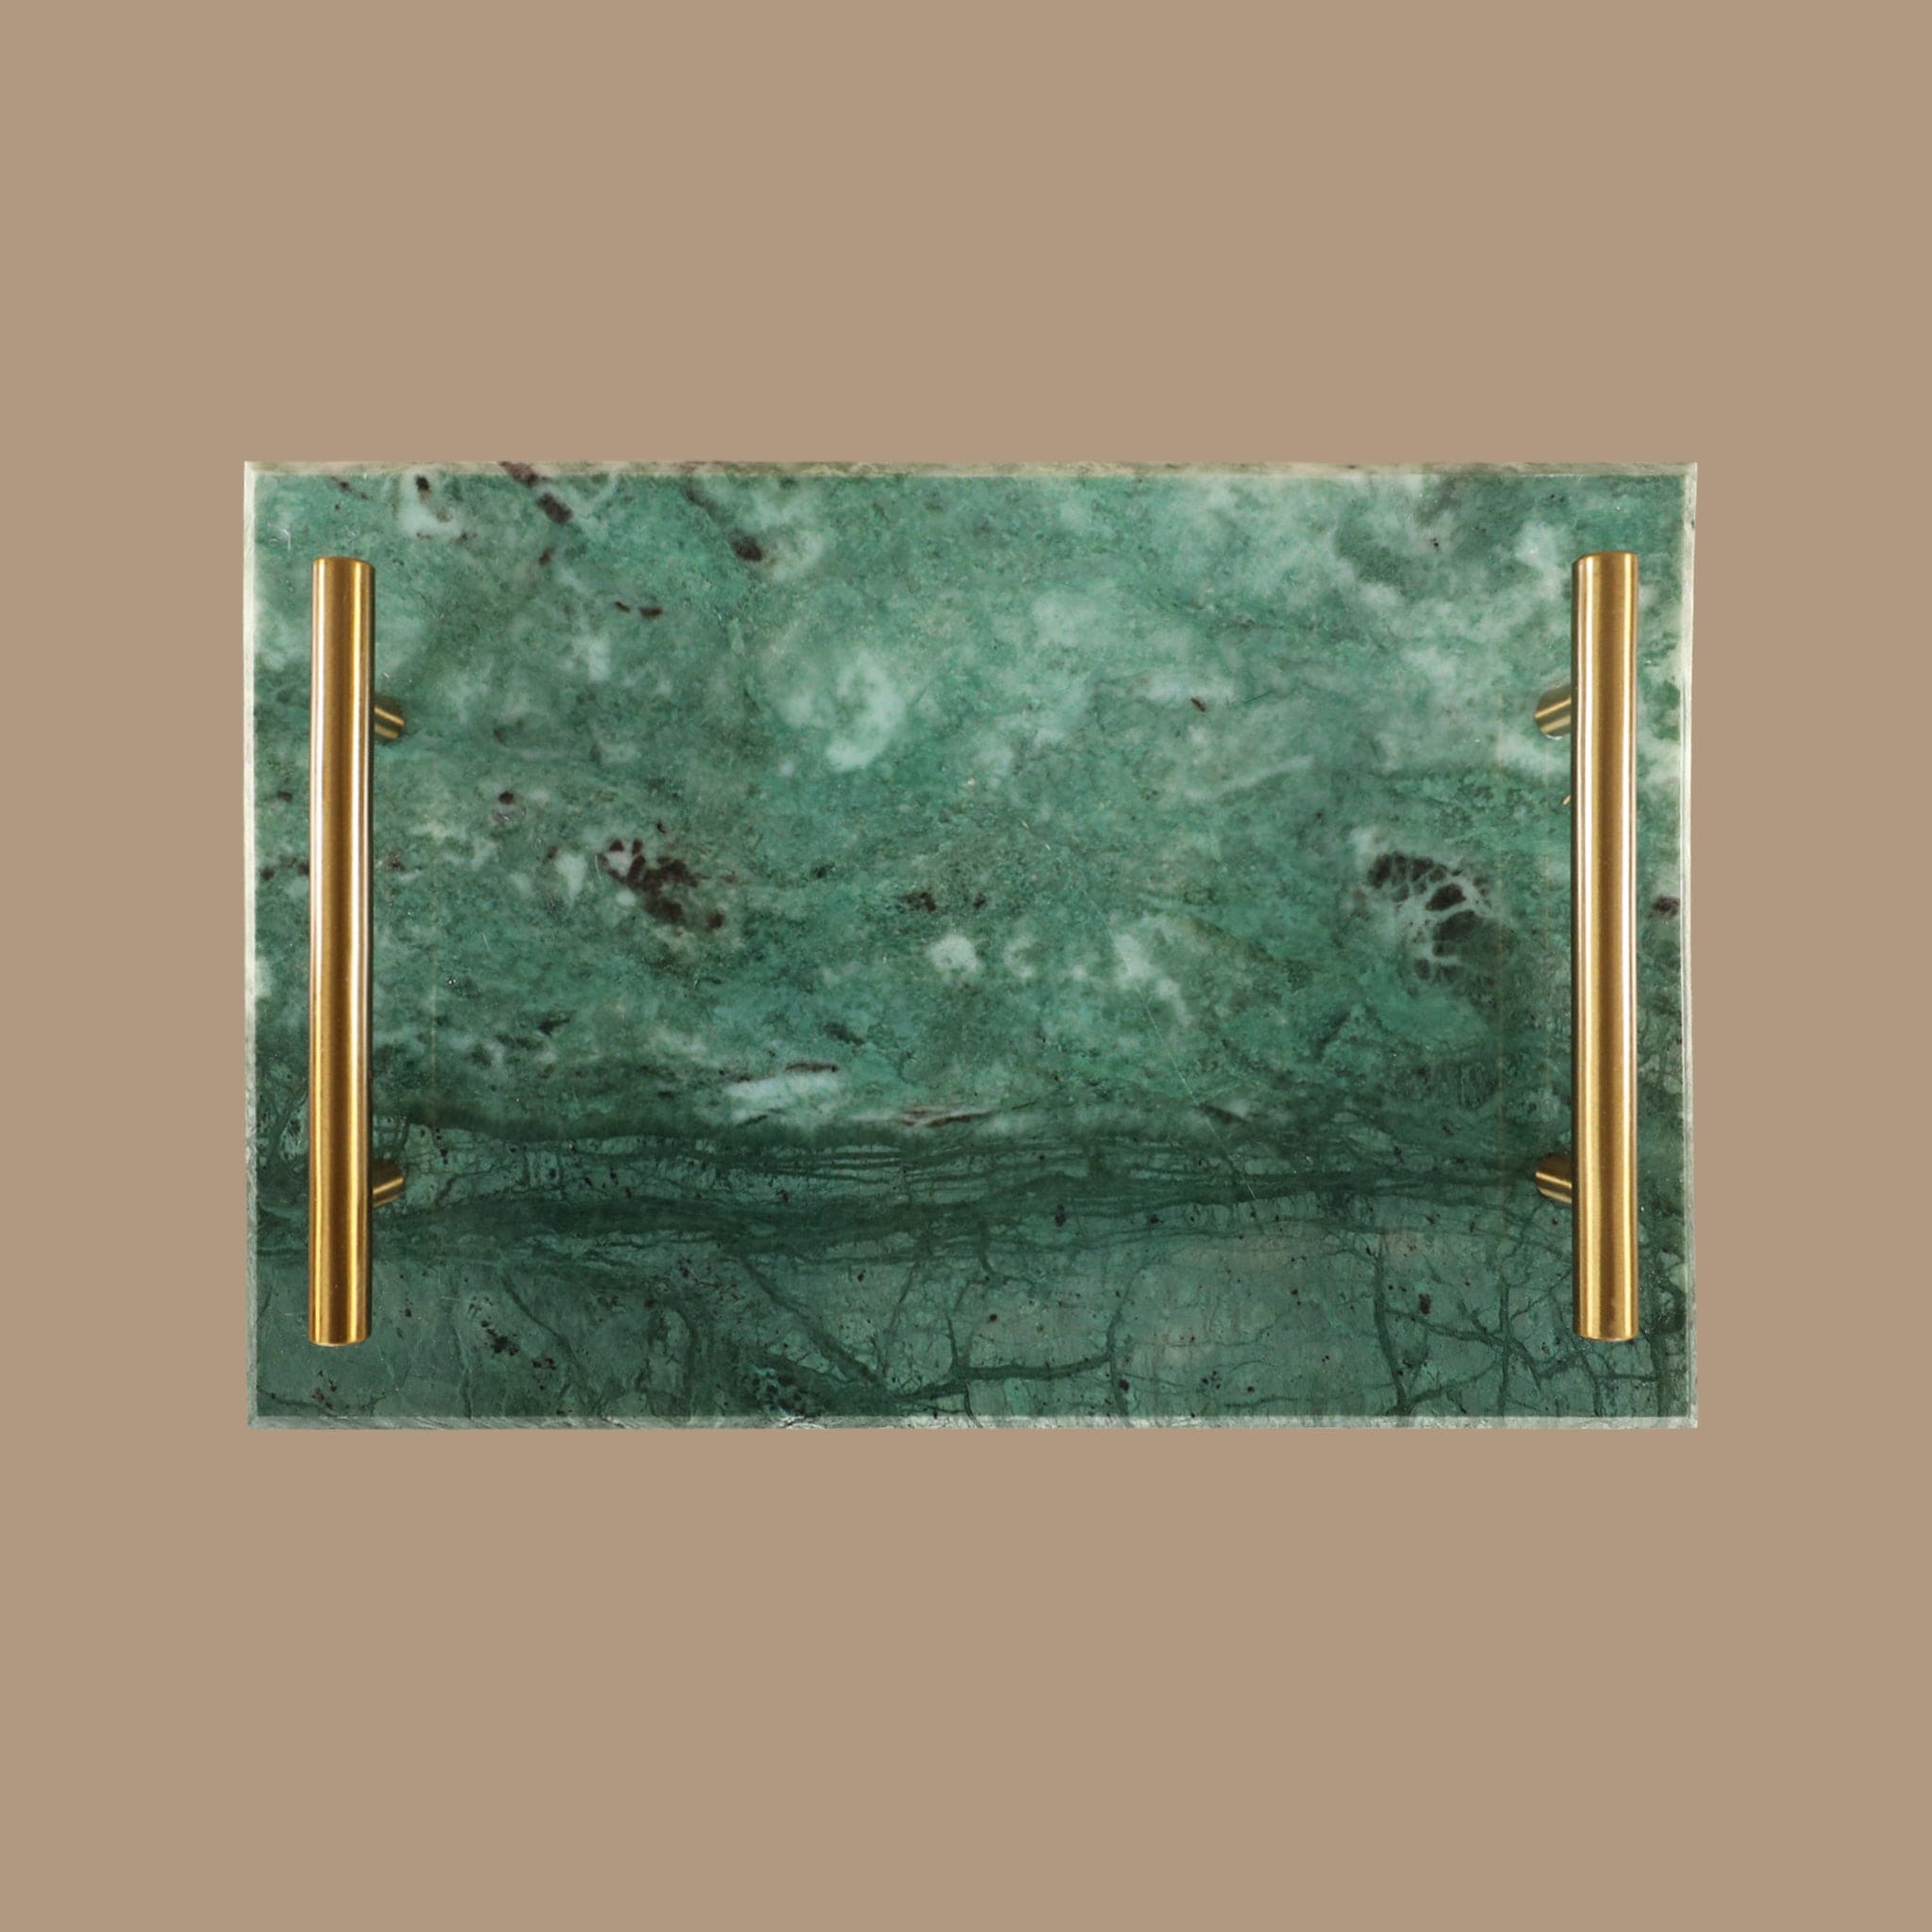 Marble Tray - Bloomr